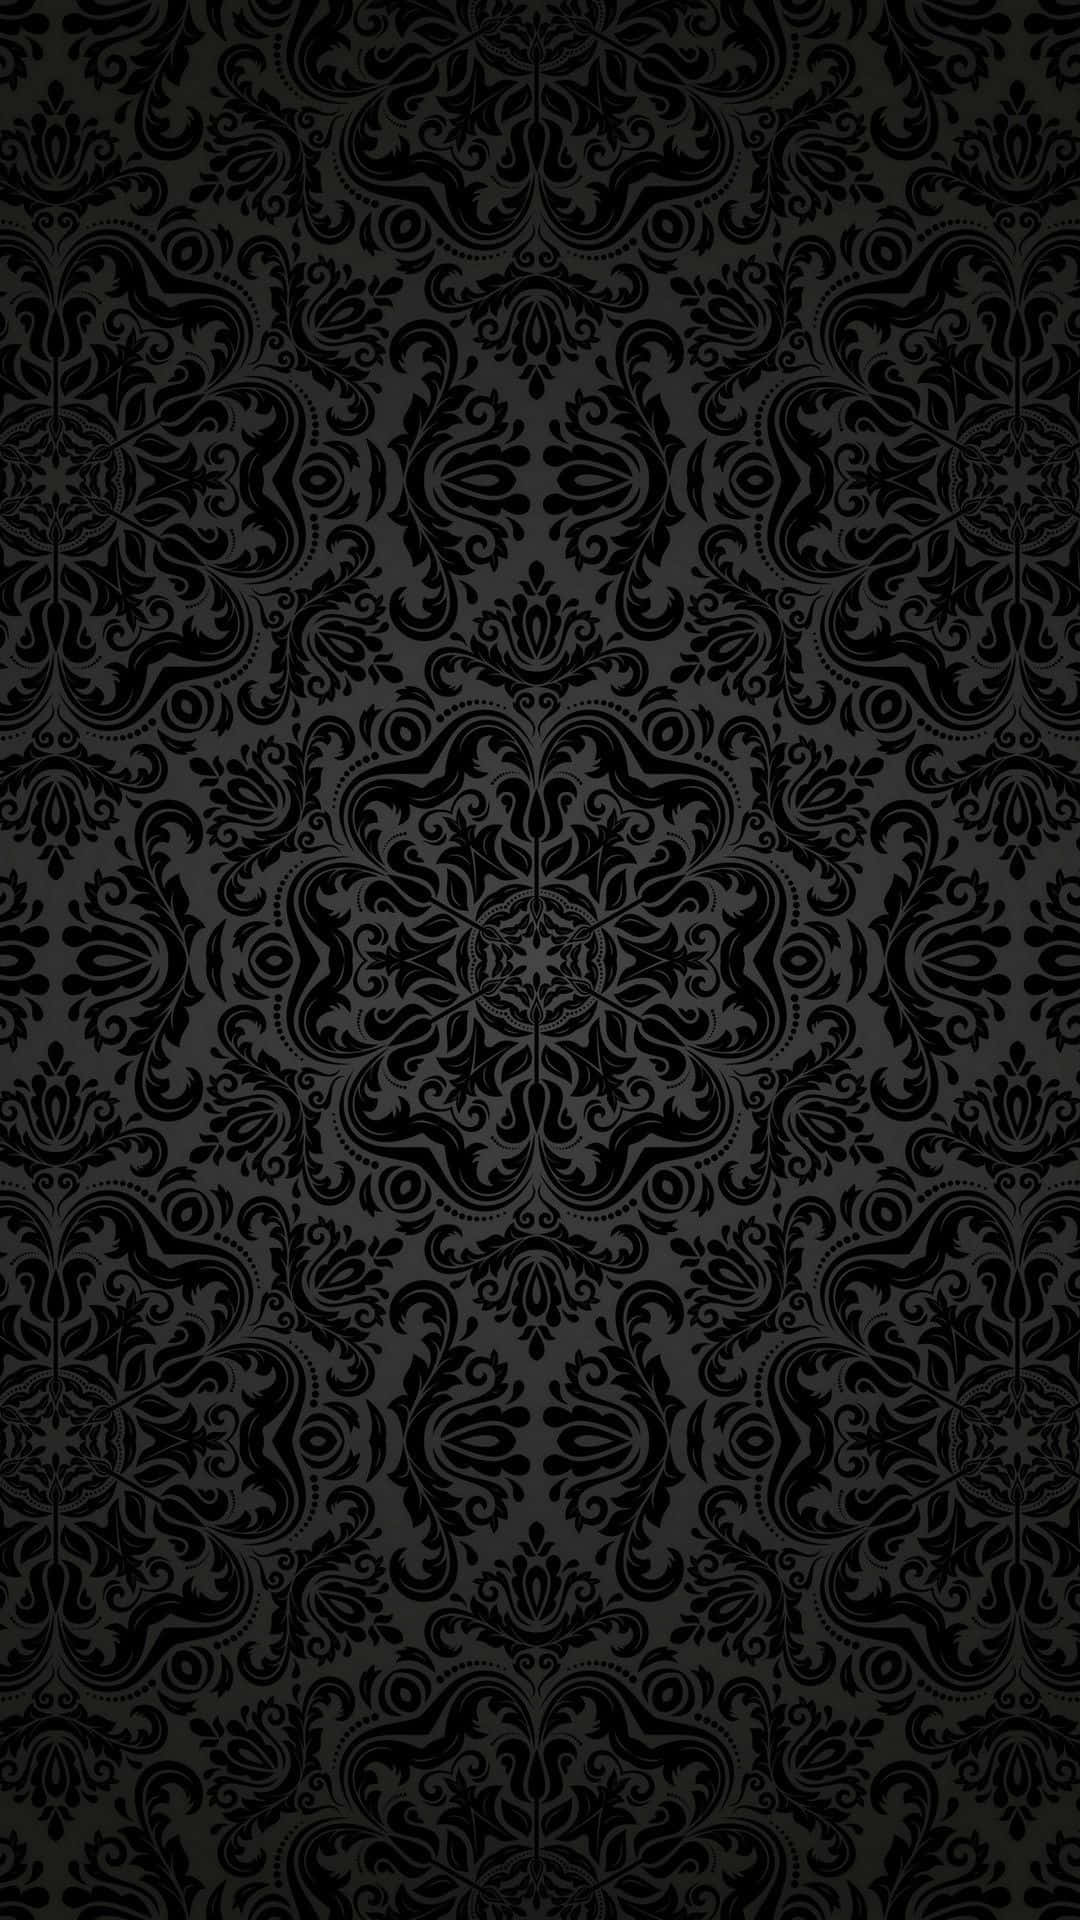 Black Pattern Designed By A Handy Person Wallpaper